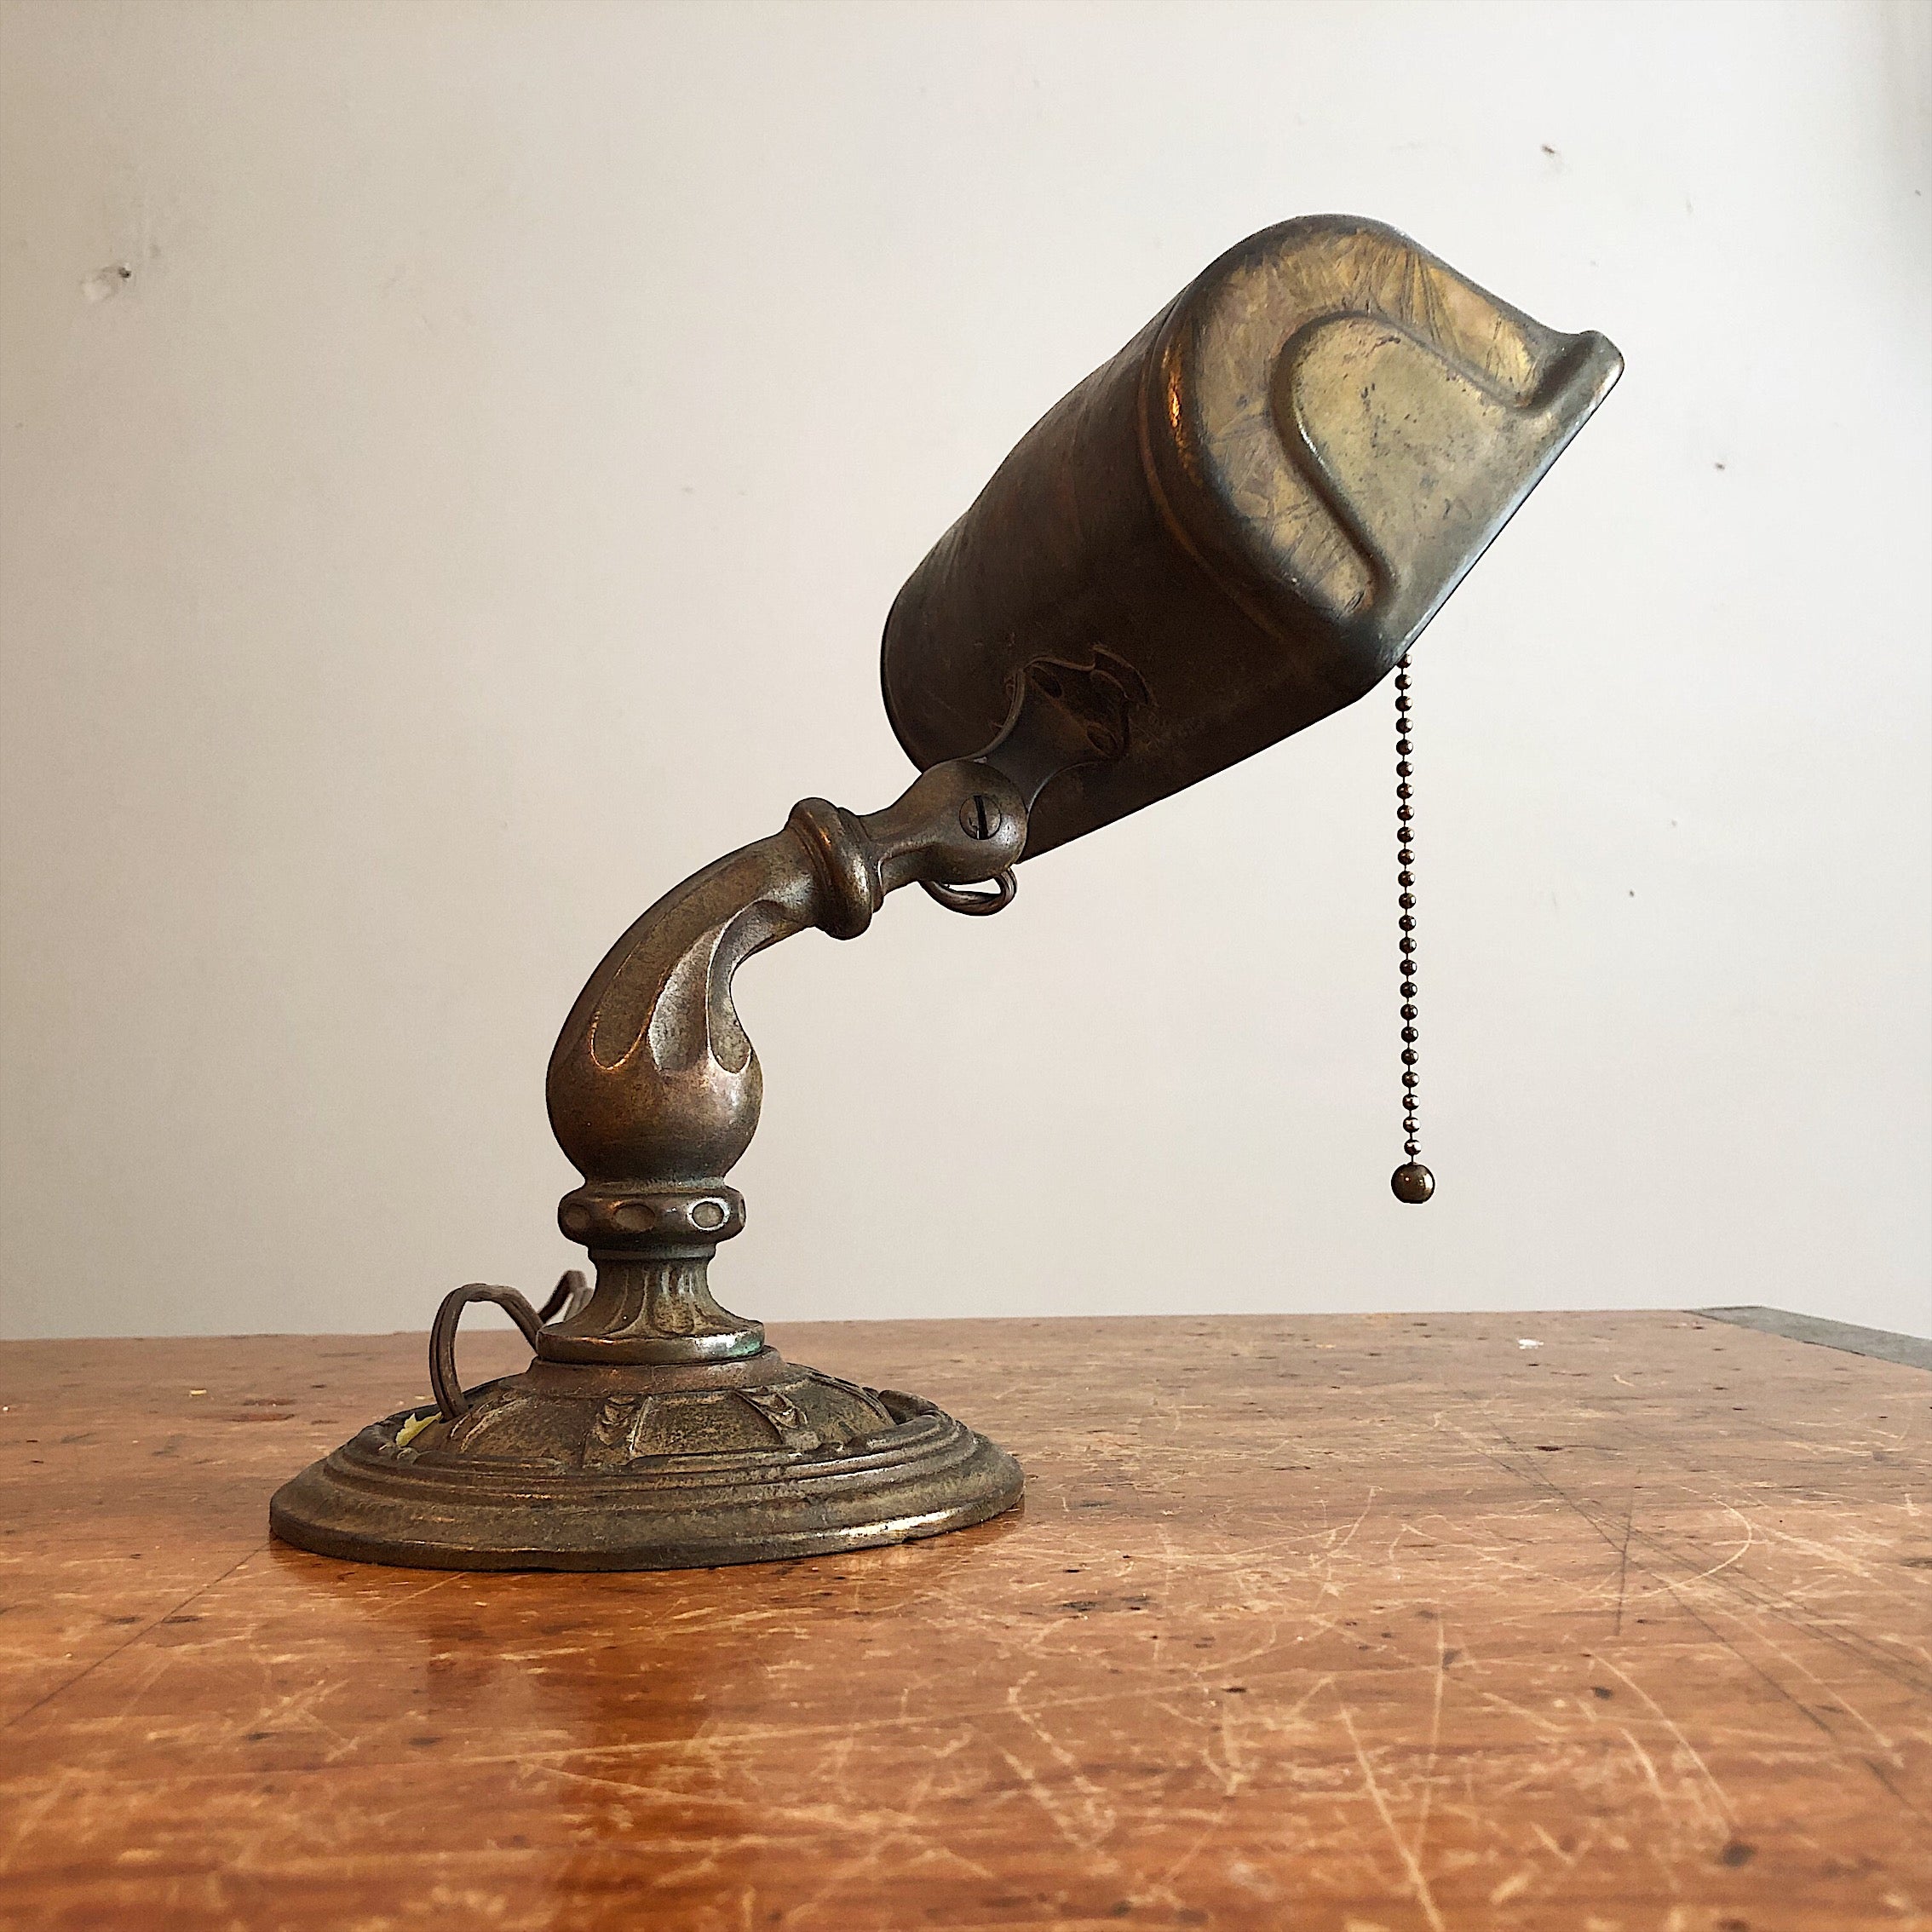 Rare Aladdin Lamp with Ornate Cast Iron Base - Antique Industrial Decor - Vintage Lighting - 1920s Table Lamp